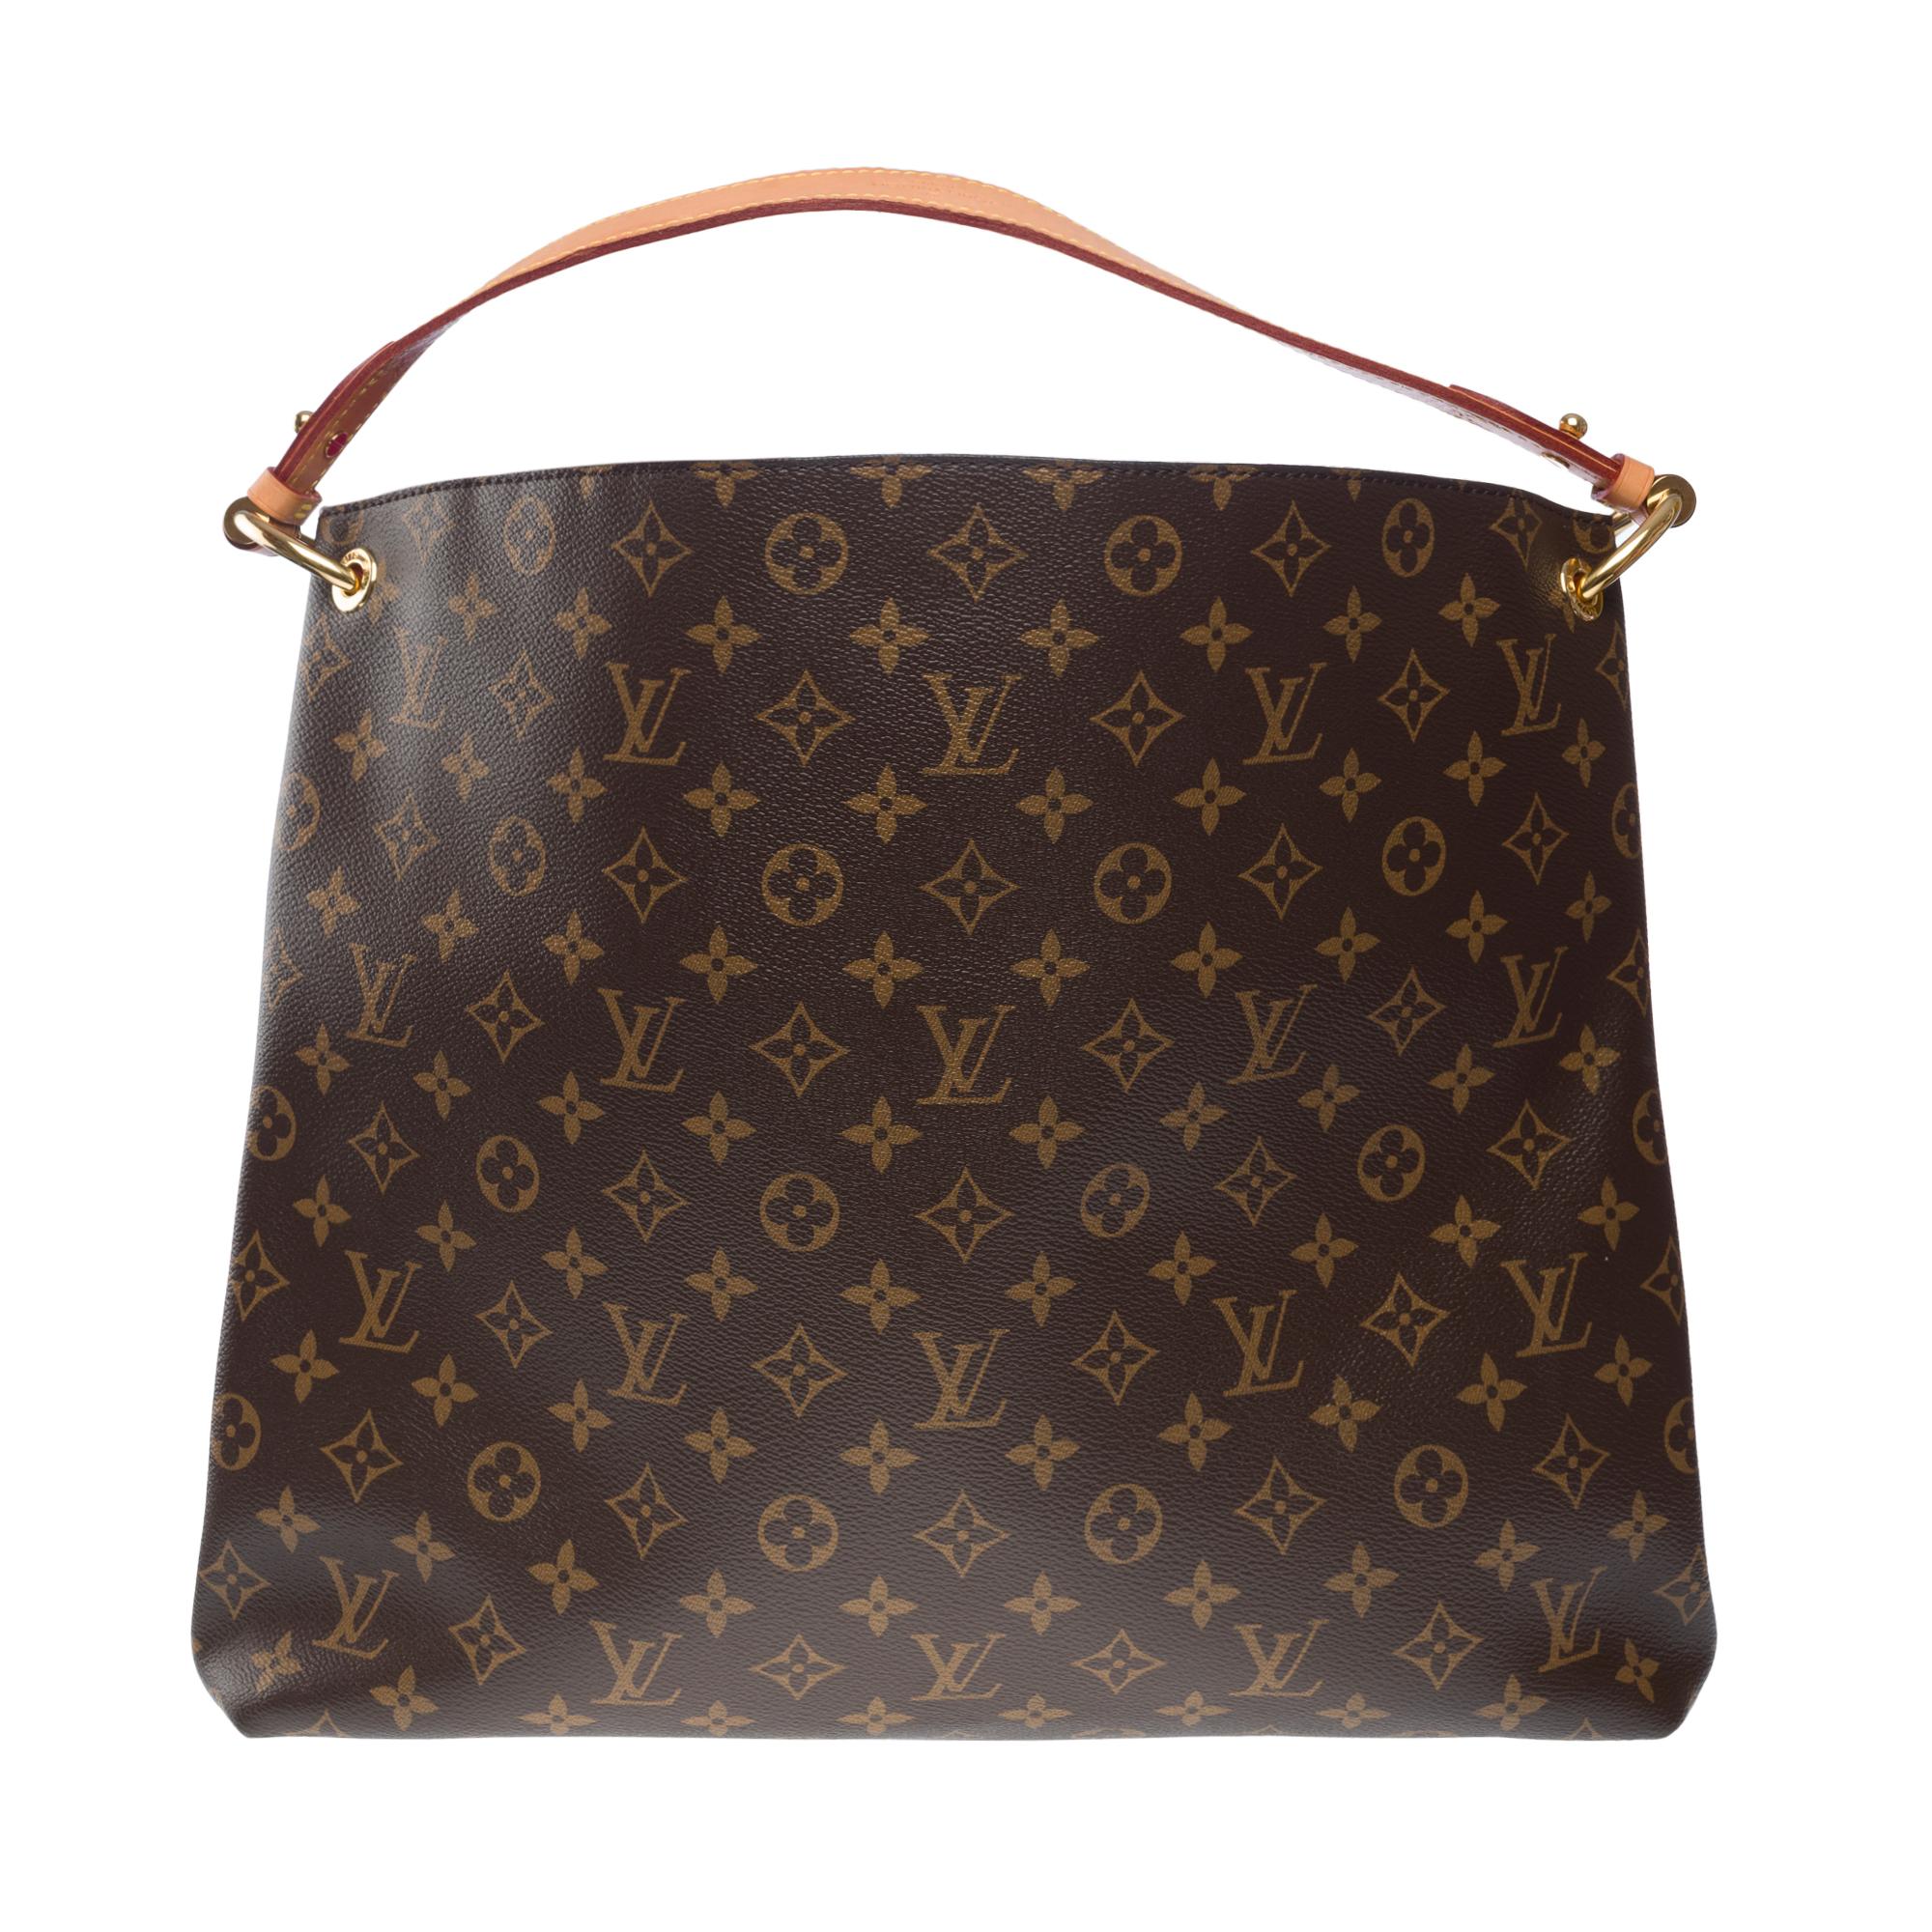 Women's Louis Vuitton Graceful MM Tote bag in brown Monogram canvas, GHW For Sale